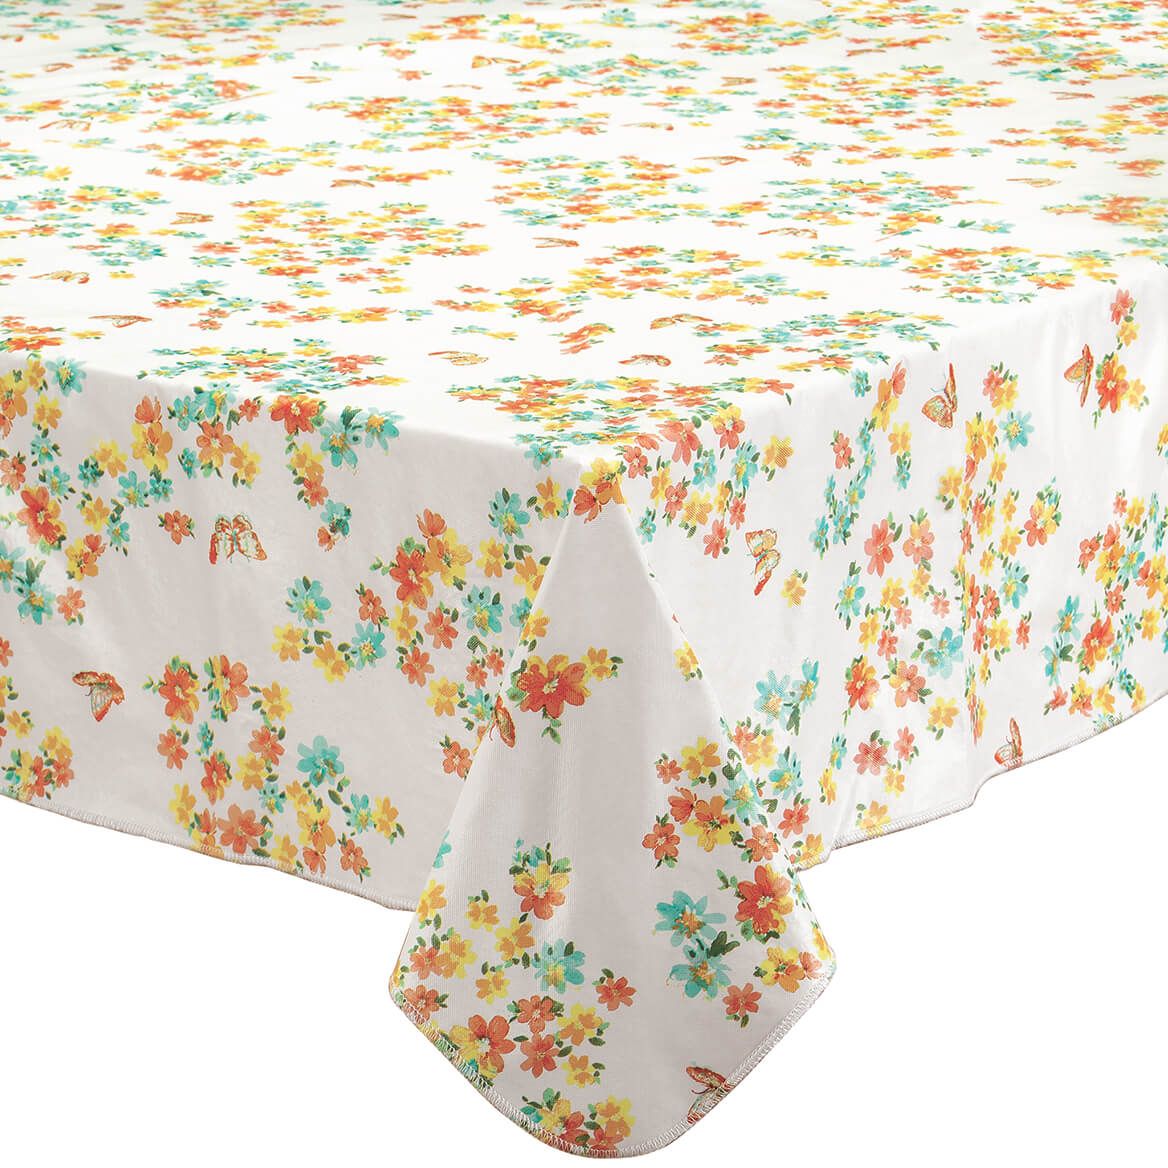 Butterfly Bliss Vinyl Table Cover by Chef's Pride + '-' + 373219